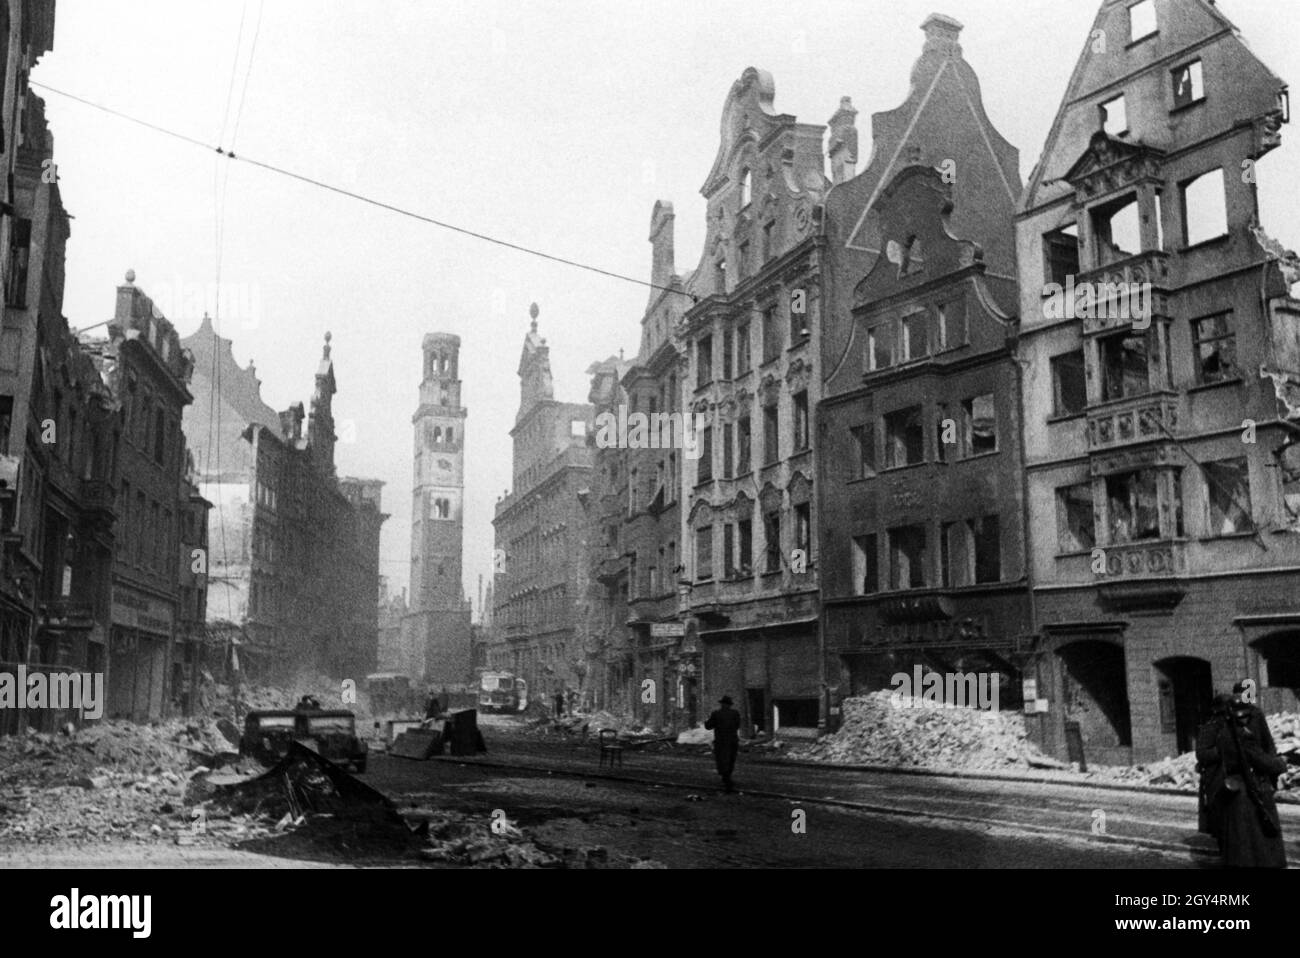 The photograph shows Maximilianstraße in Augsburg in the last years of the Second World War. Many houses are completely bombed out after air raids. In the background you can see the damaged Perlachturm and the town hall (to the right). On the right side of the picture three soldiers of the Wehrmacht are crossing the street. [automated translation] Stock Photo